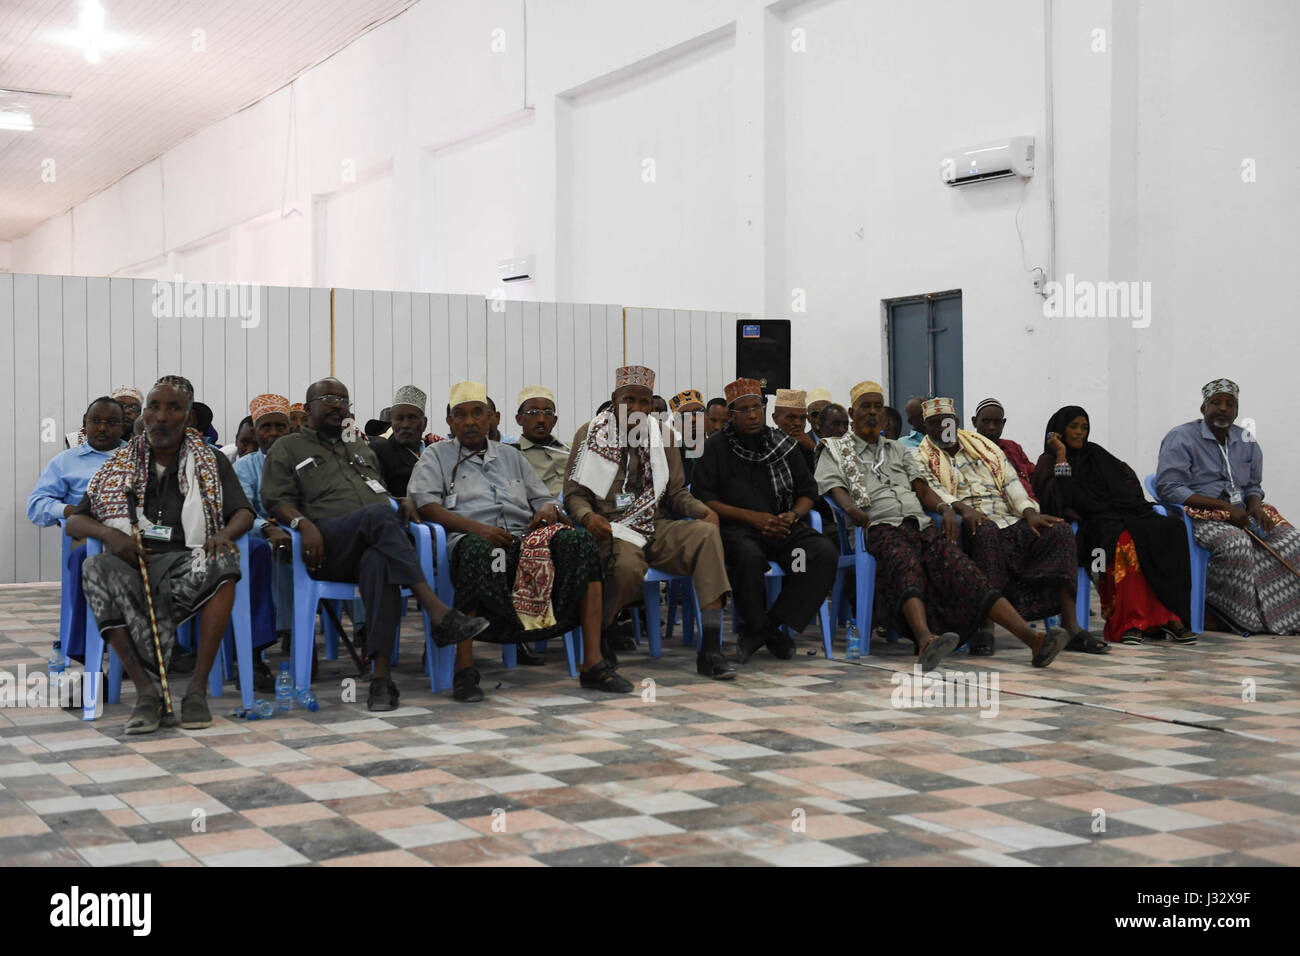 Delegates wait to vote during the electoral process to choose members of the Upper House of the  Federal Parliament in Mogadishu, Somalia on January 8, 2017. AMISOM Photo / Omar Abdisalan Stock Photo